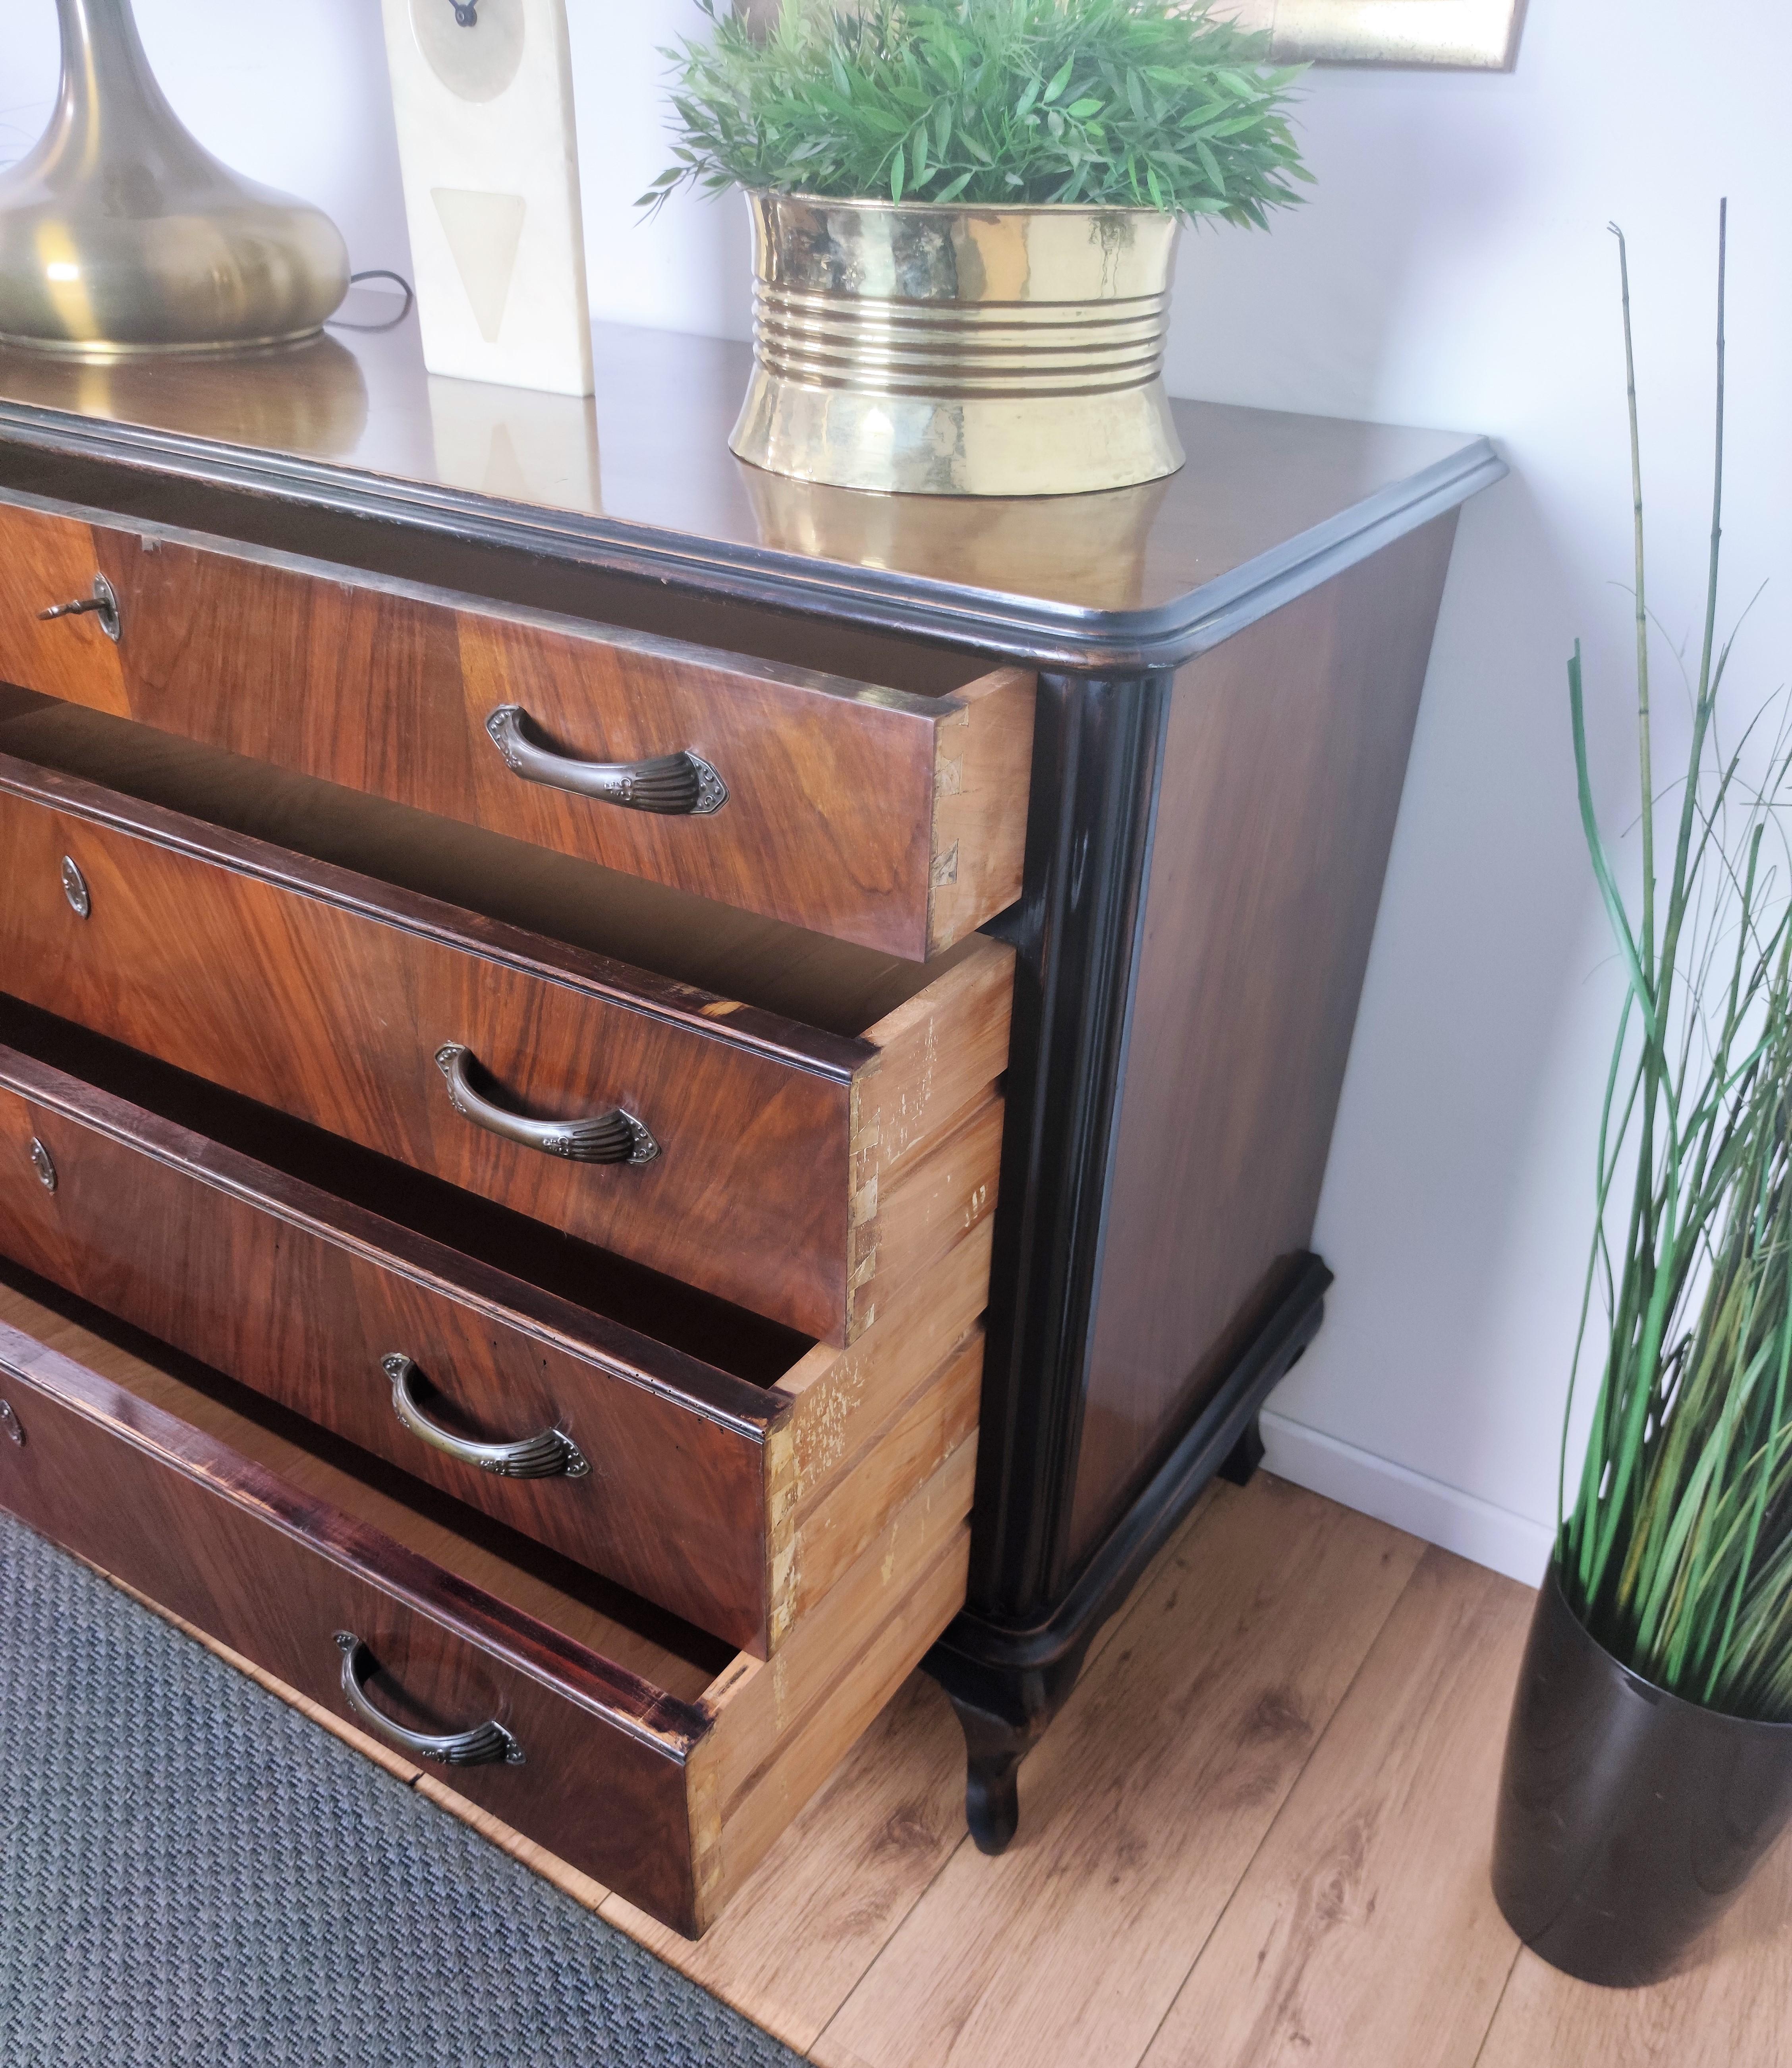 20th Century Italian Mid-Century Modern Wood and Brass Commode Dresser Chest of 4 Drawers For Sale